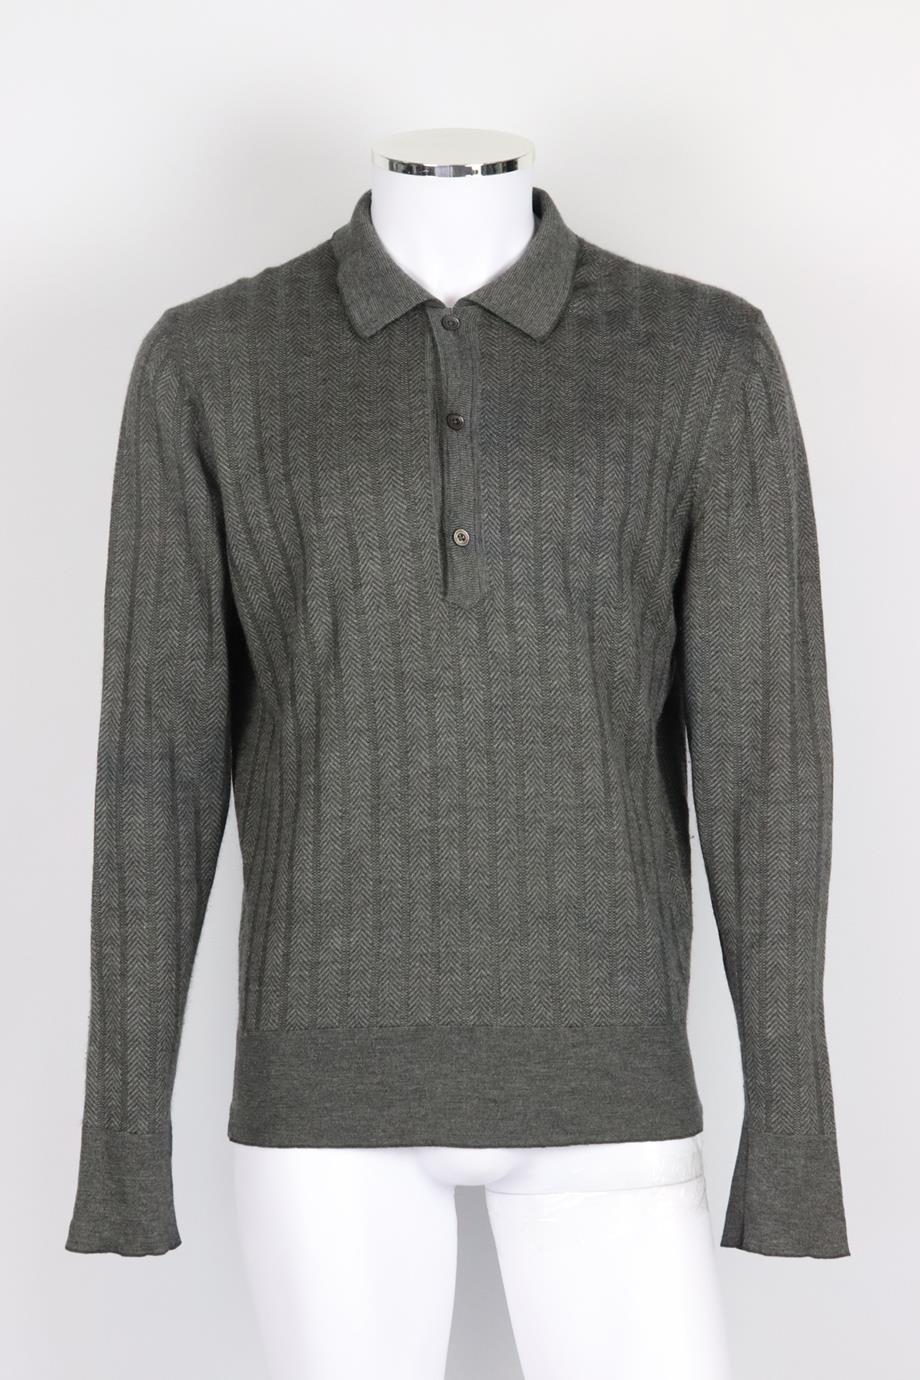 Tom Ford men's wool and cashmere blend sweater. Grey. Long sleeve, crewneck. Slips on. 39% Wool, 31% cashmere, 30% silk. Size: IT 48 (Medium, EU 48, UK/US Chest 38). Chest: 43 in. Waist: 39 in. Hips: 35.8 in. Length: 27.5 in. Very good condition -